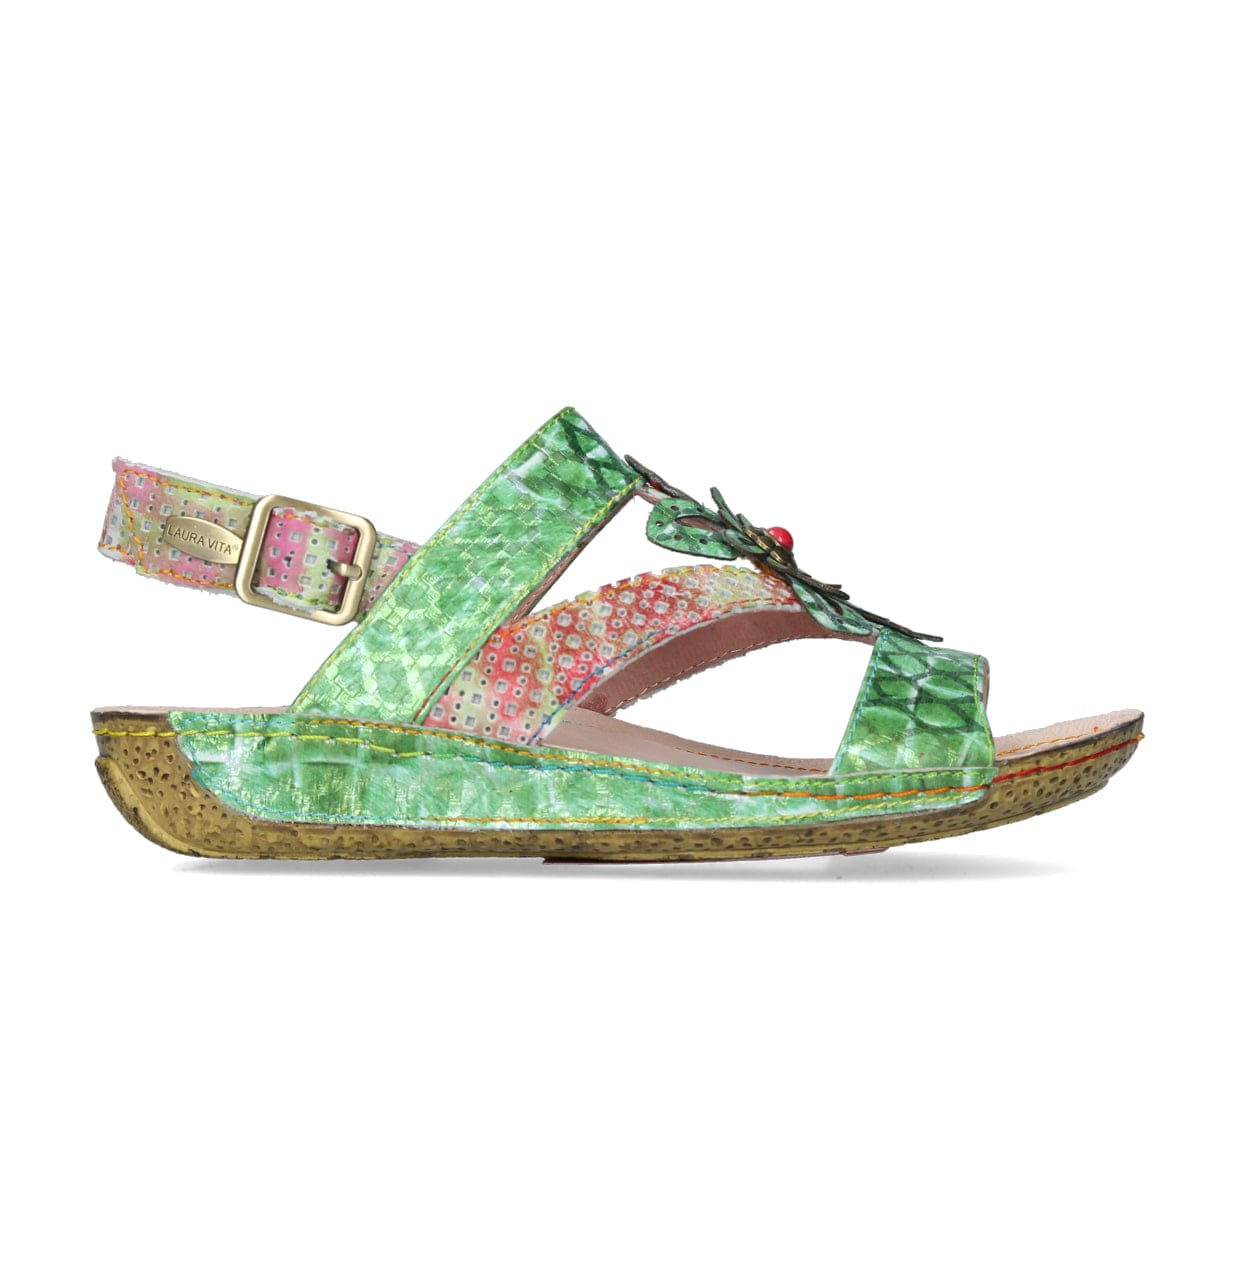 Chaussures LINAO 05 - 35 / Vert - Sandale